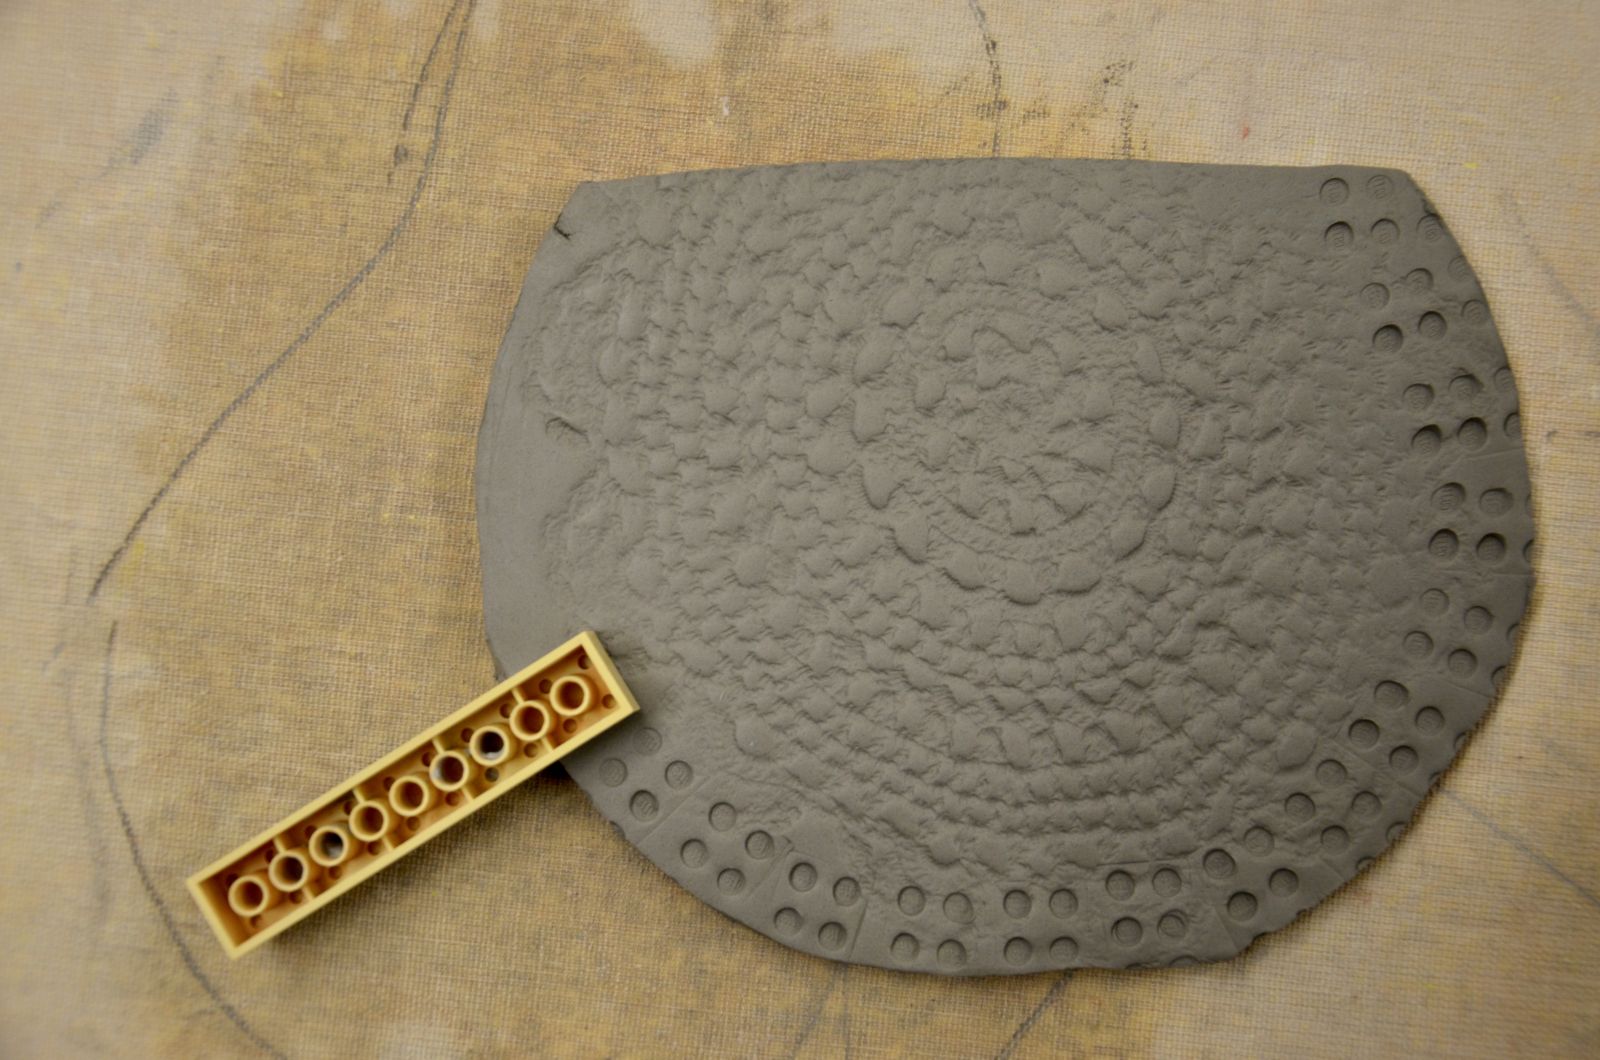 Using a lego to create texture in clay slab